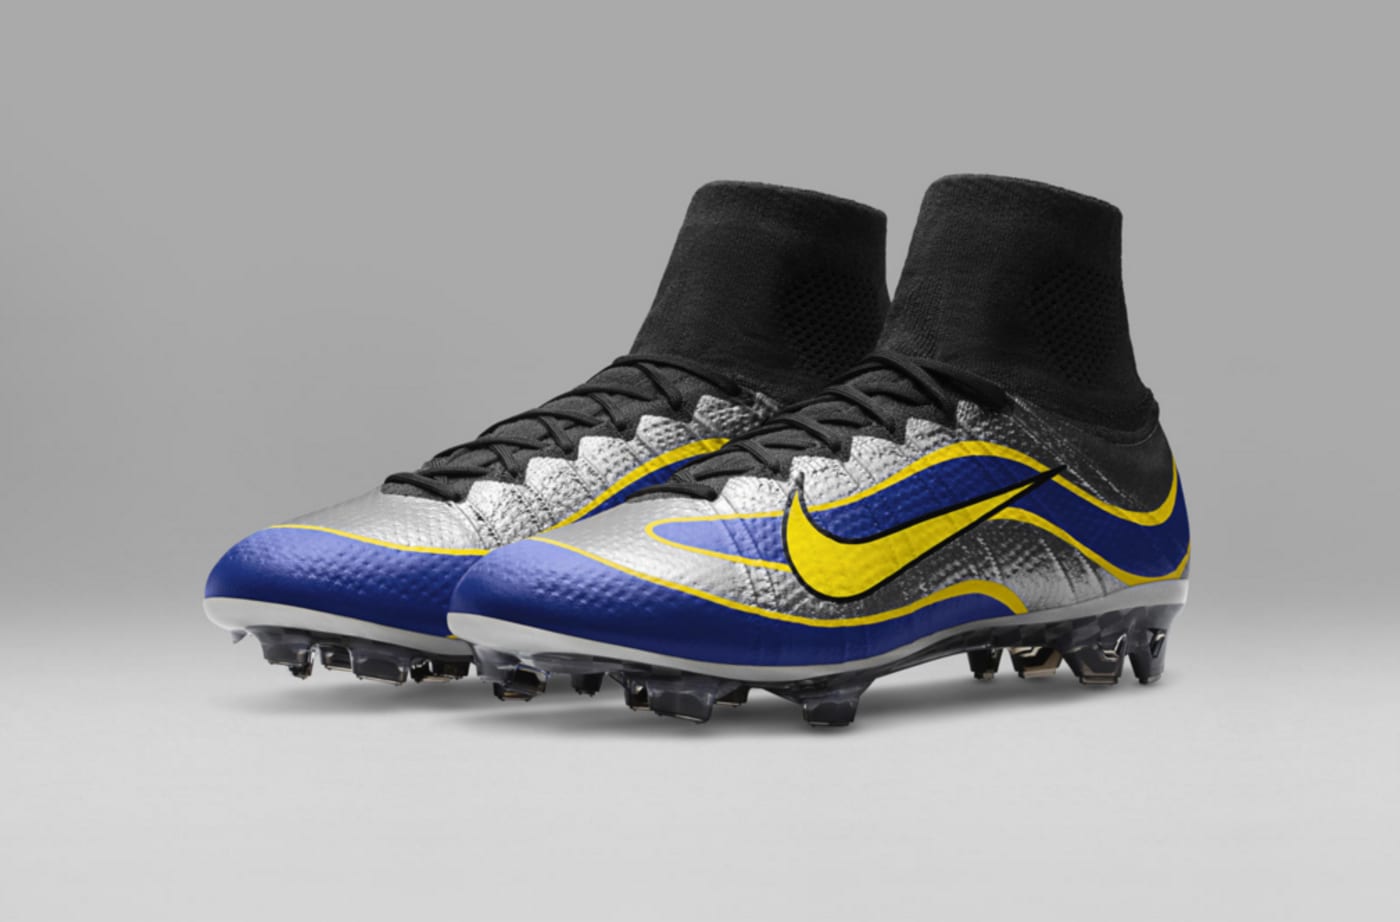 The Latest Nike Mercurial Release Is Throwback to One of the Most Iconic Football Boots of All Time Complex UK